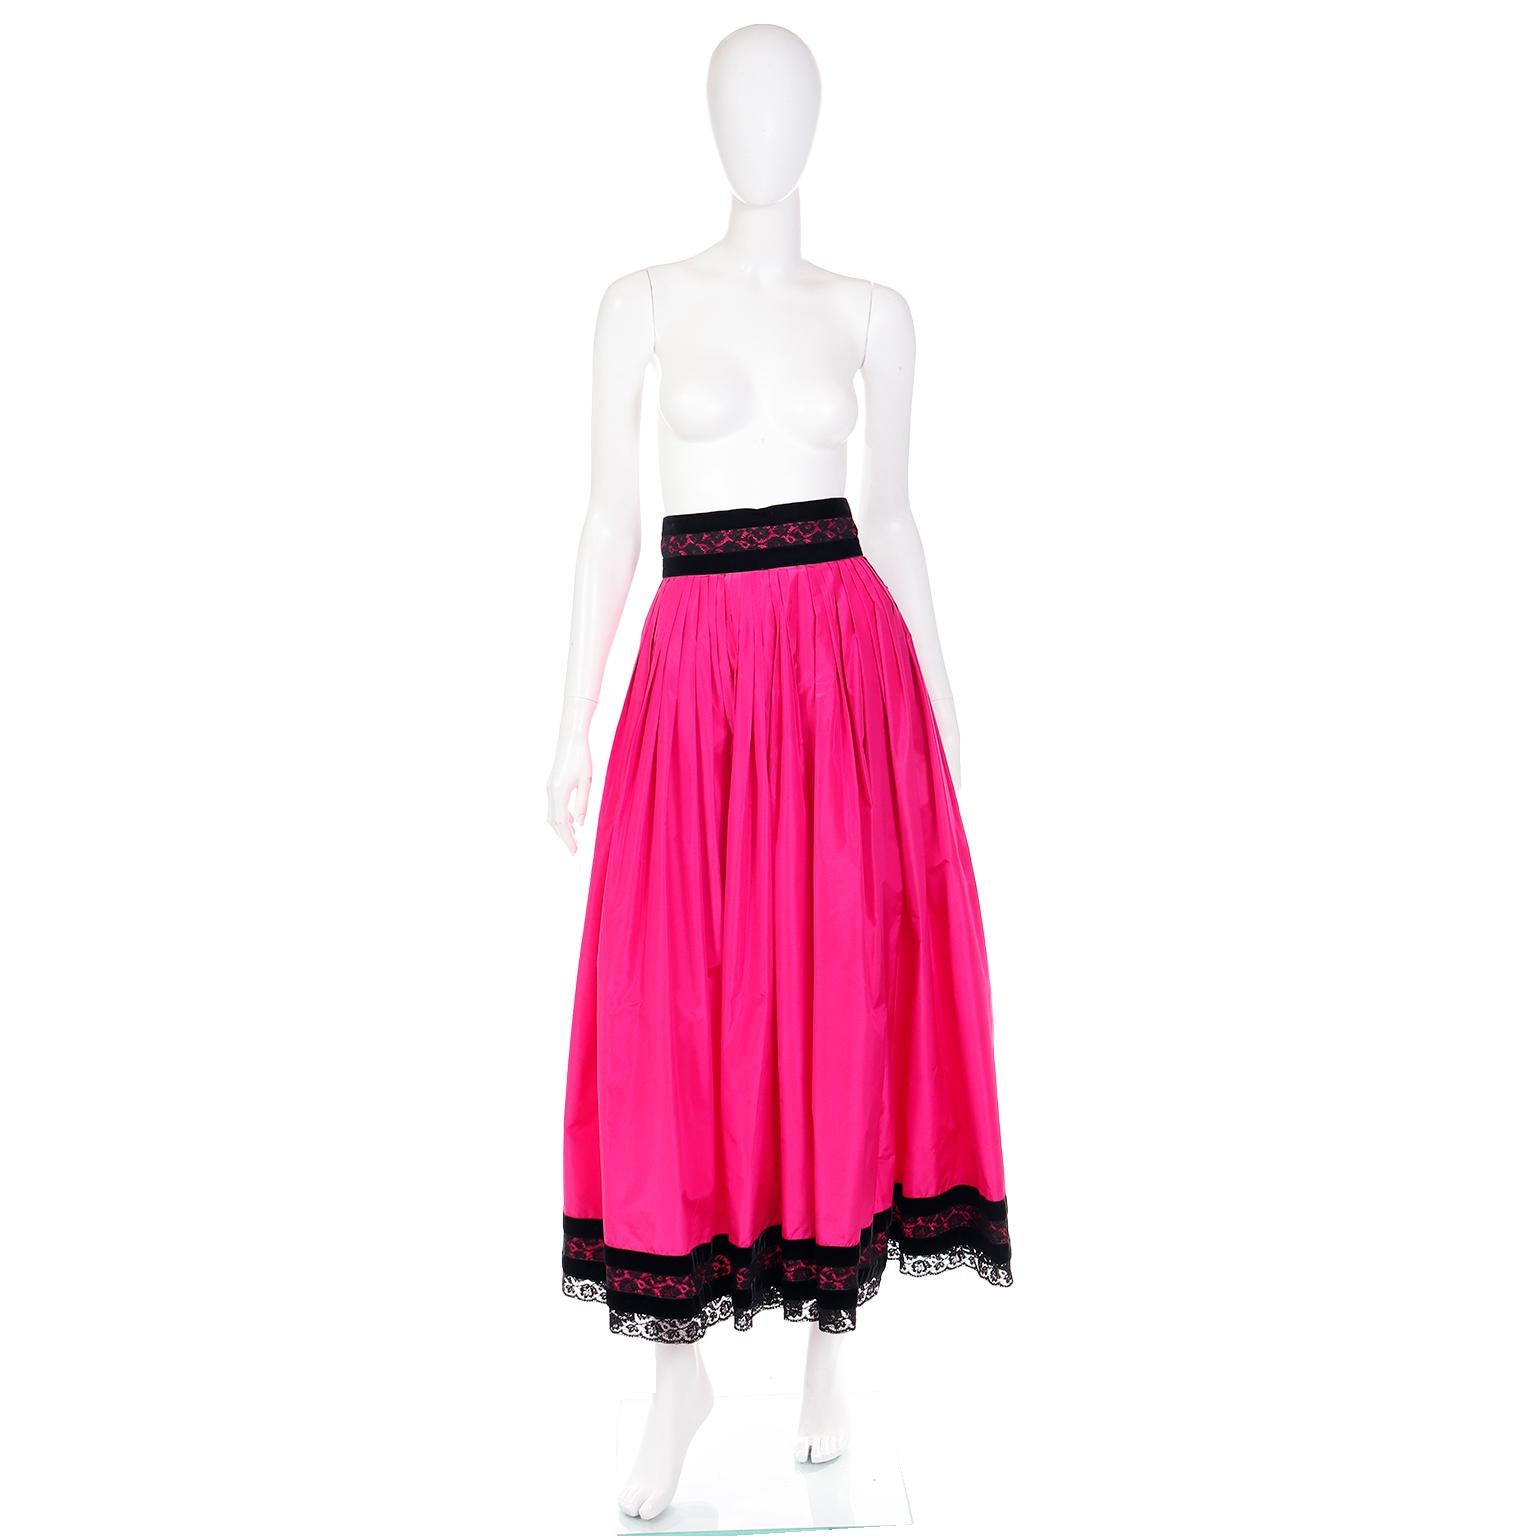 This is a bright hot pink silk taffeta Oscar De La Renta maxi skirt with lovely black velvet and black lace trim on the waist and the hem. 
There is a large decorative bow on the back waist with the same black velvet and black lace. The hot pink